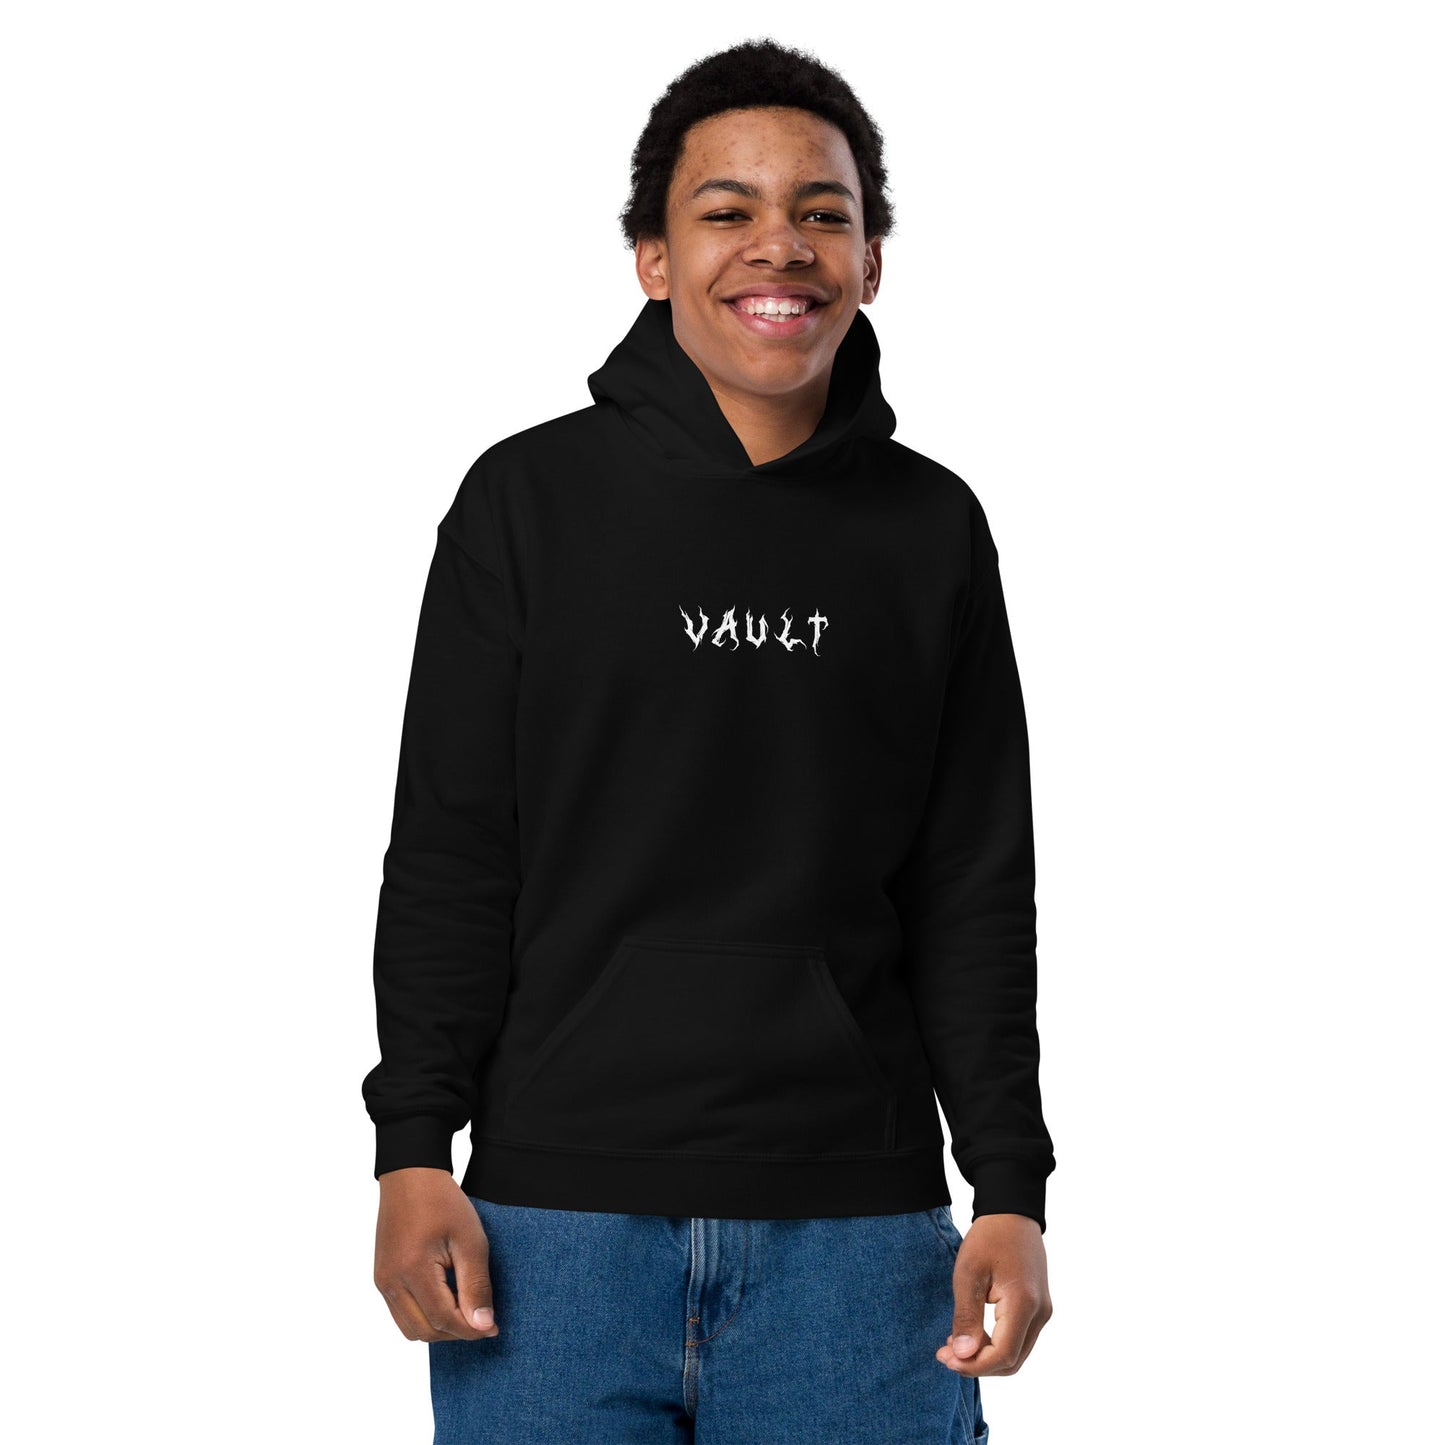 Vault Youth Wretched Logo Hoodie - Multiple Colors - Vault Board Shop Vault Board Shop